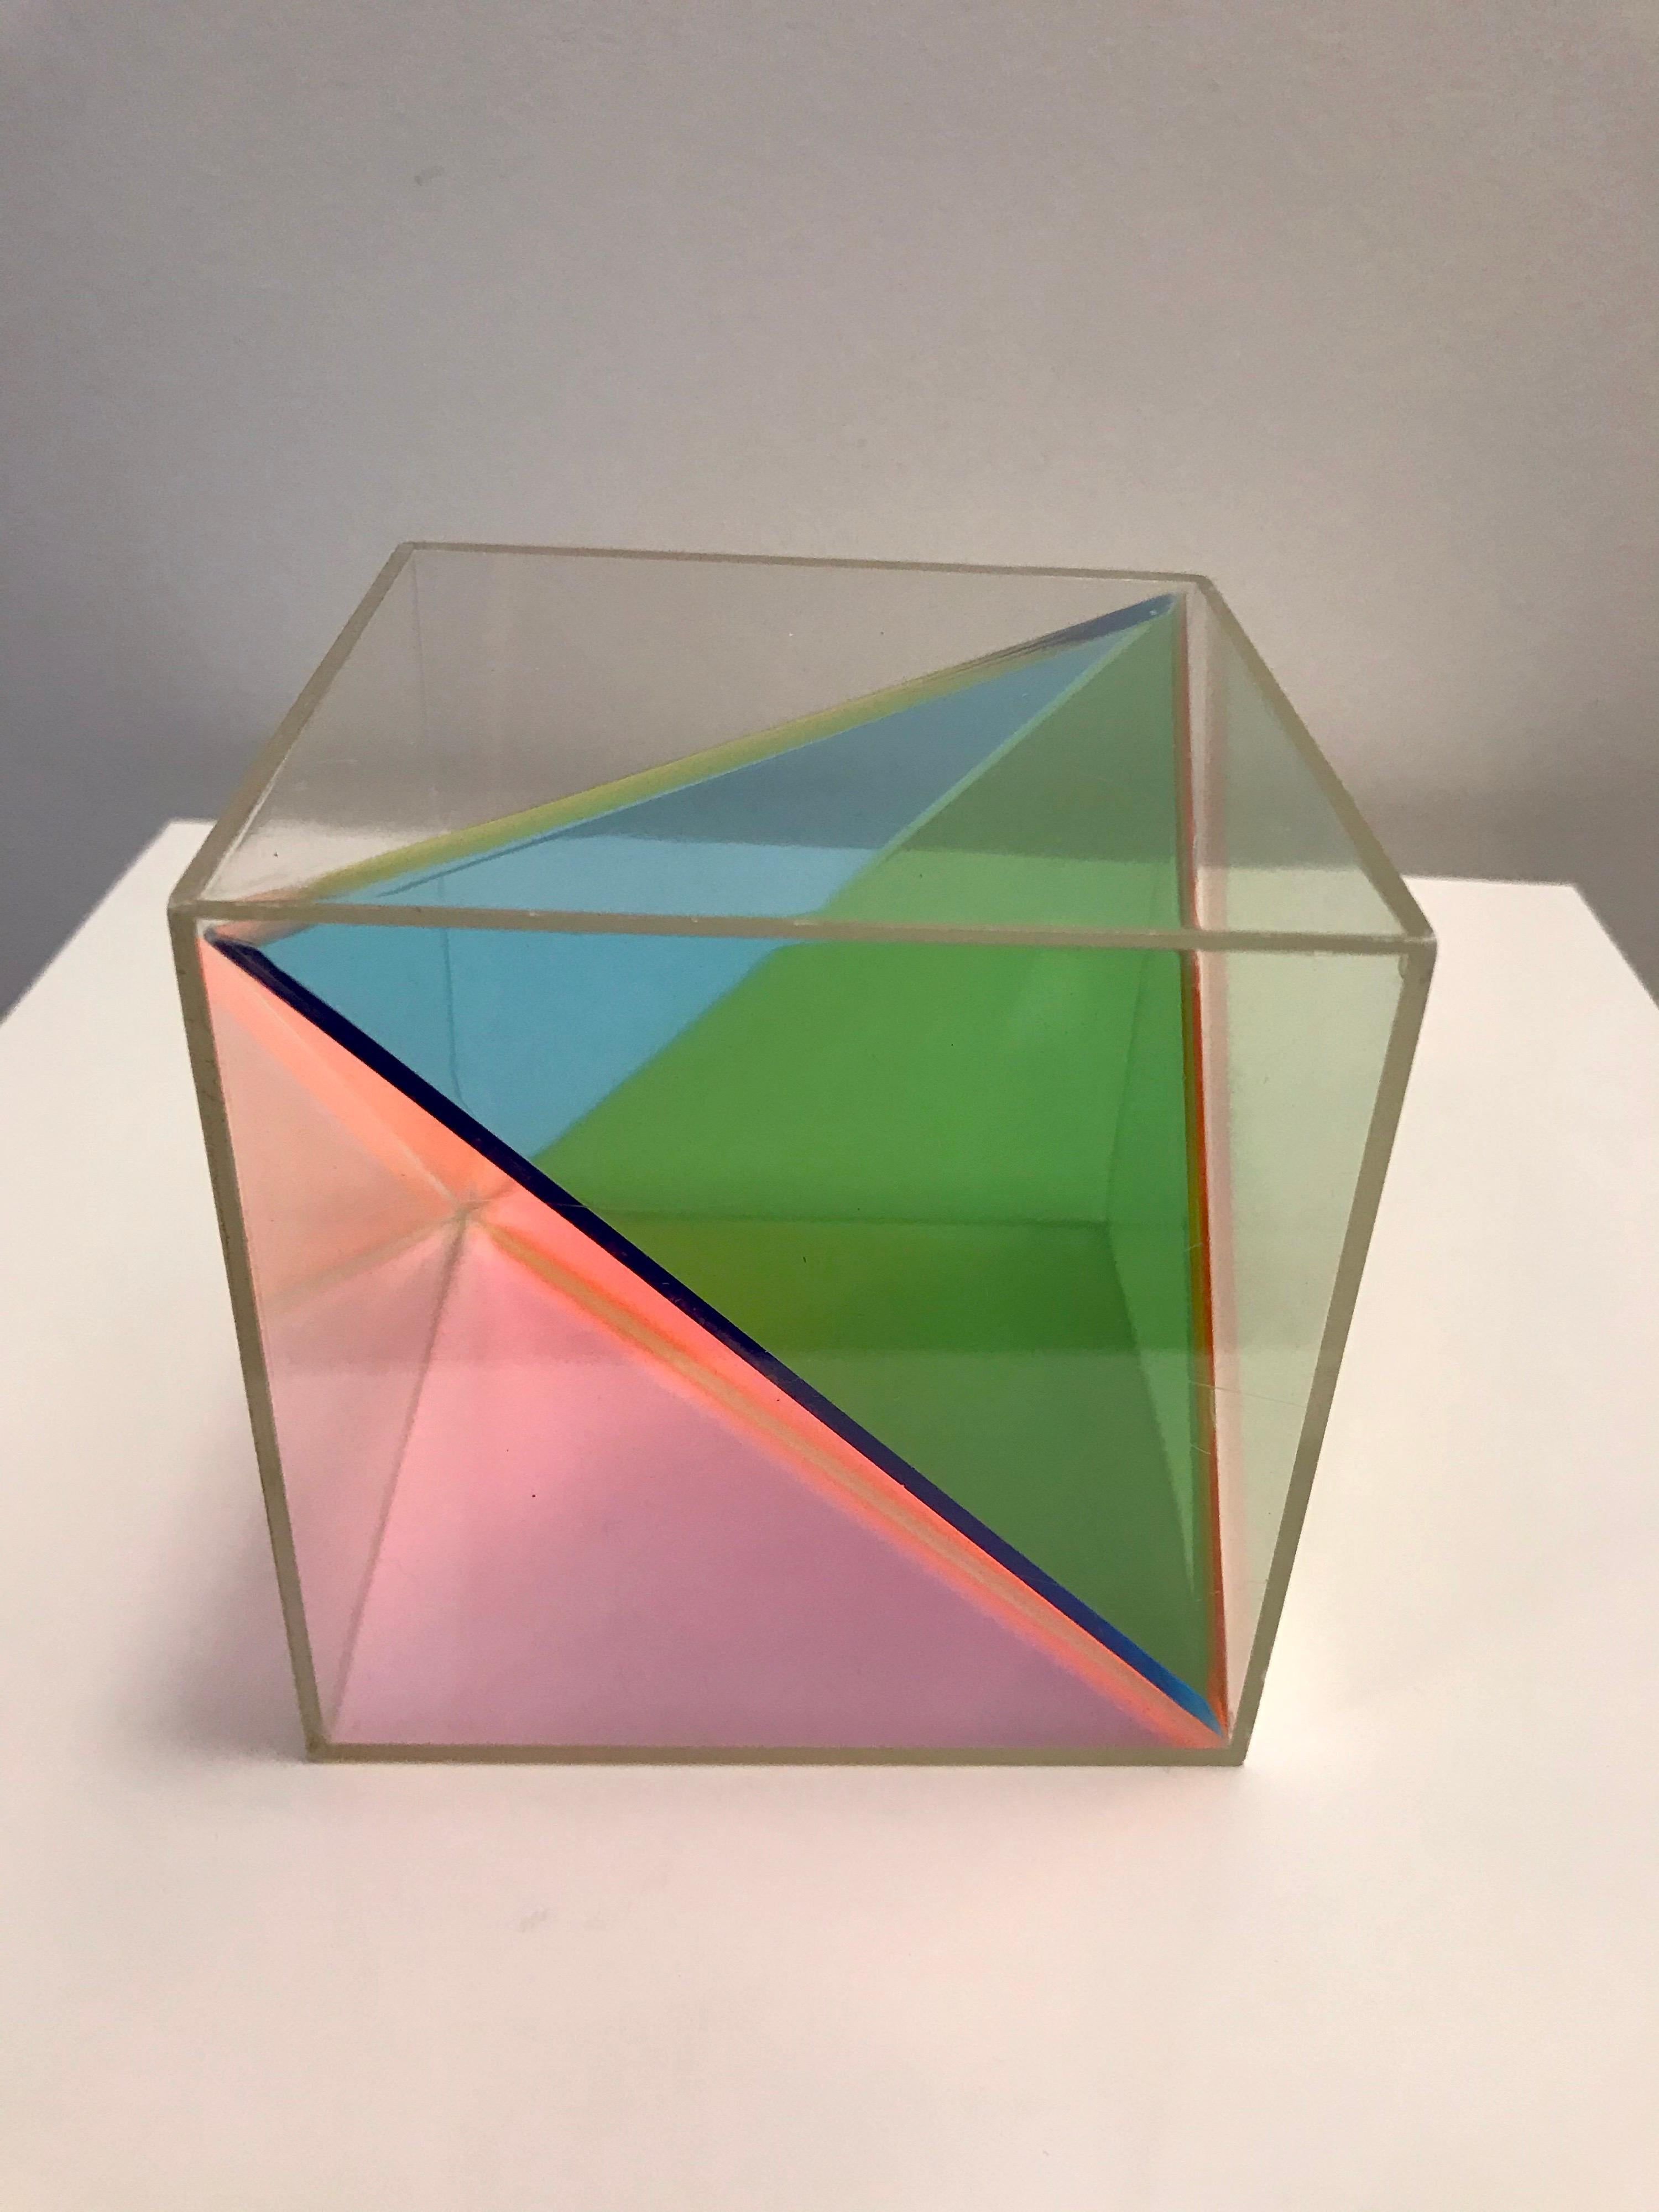 Hand-Crafted Clement Meadmore 'Rainbow Box' Objet d'Art, 1970's